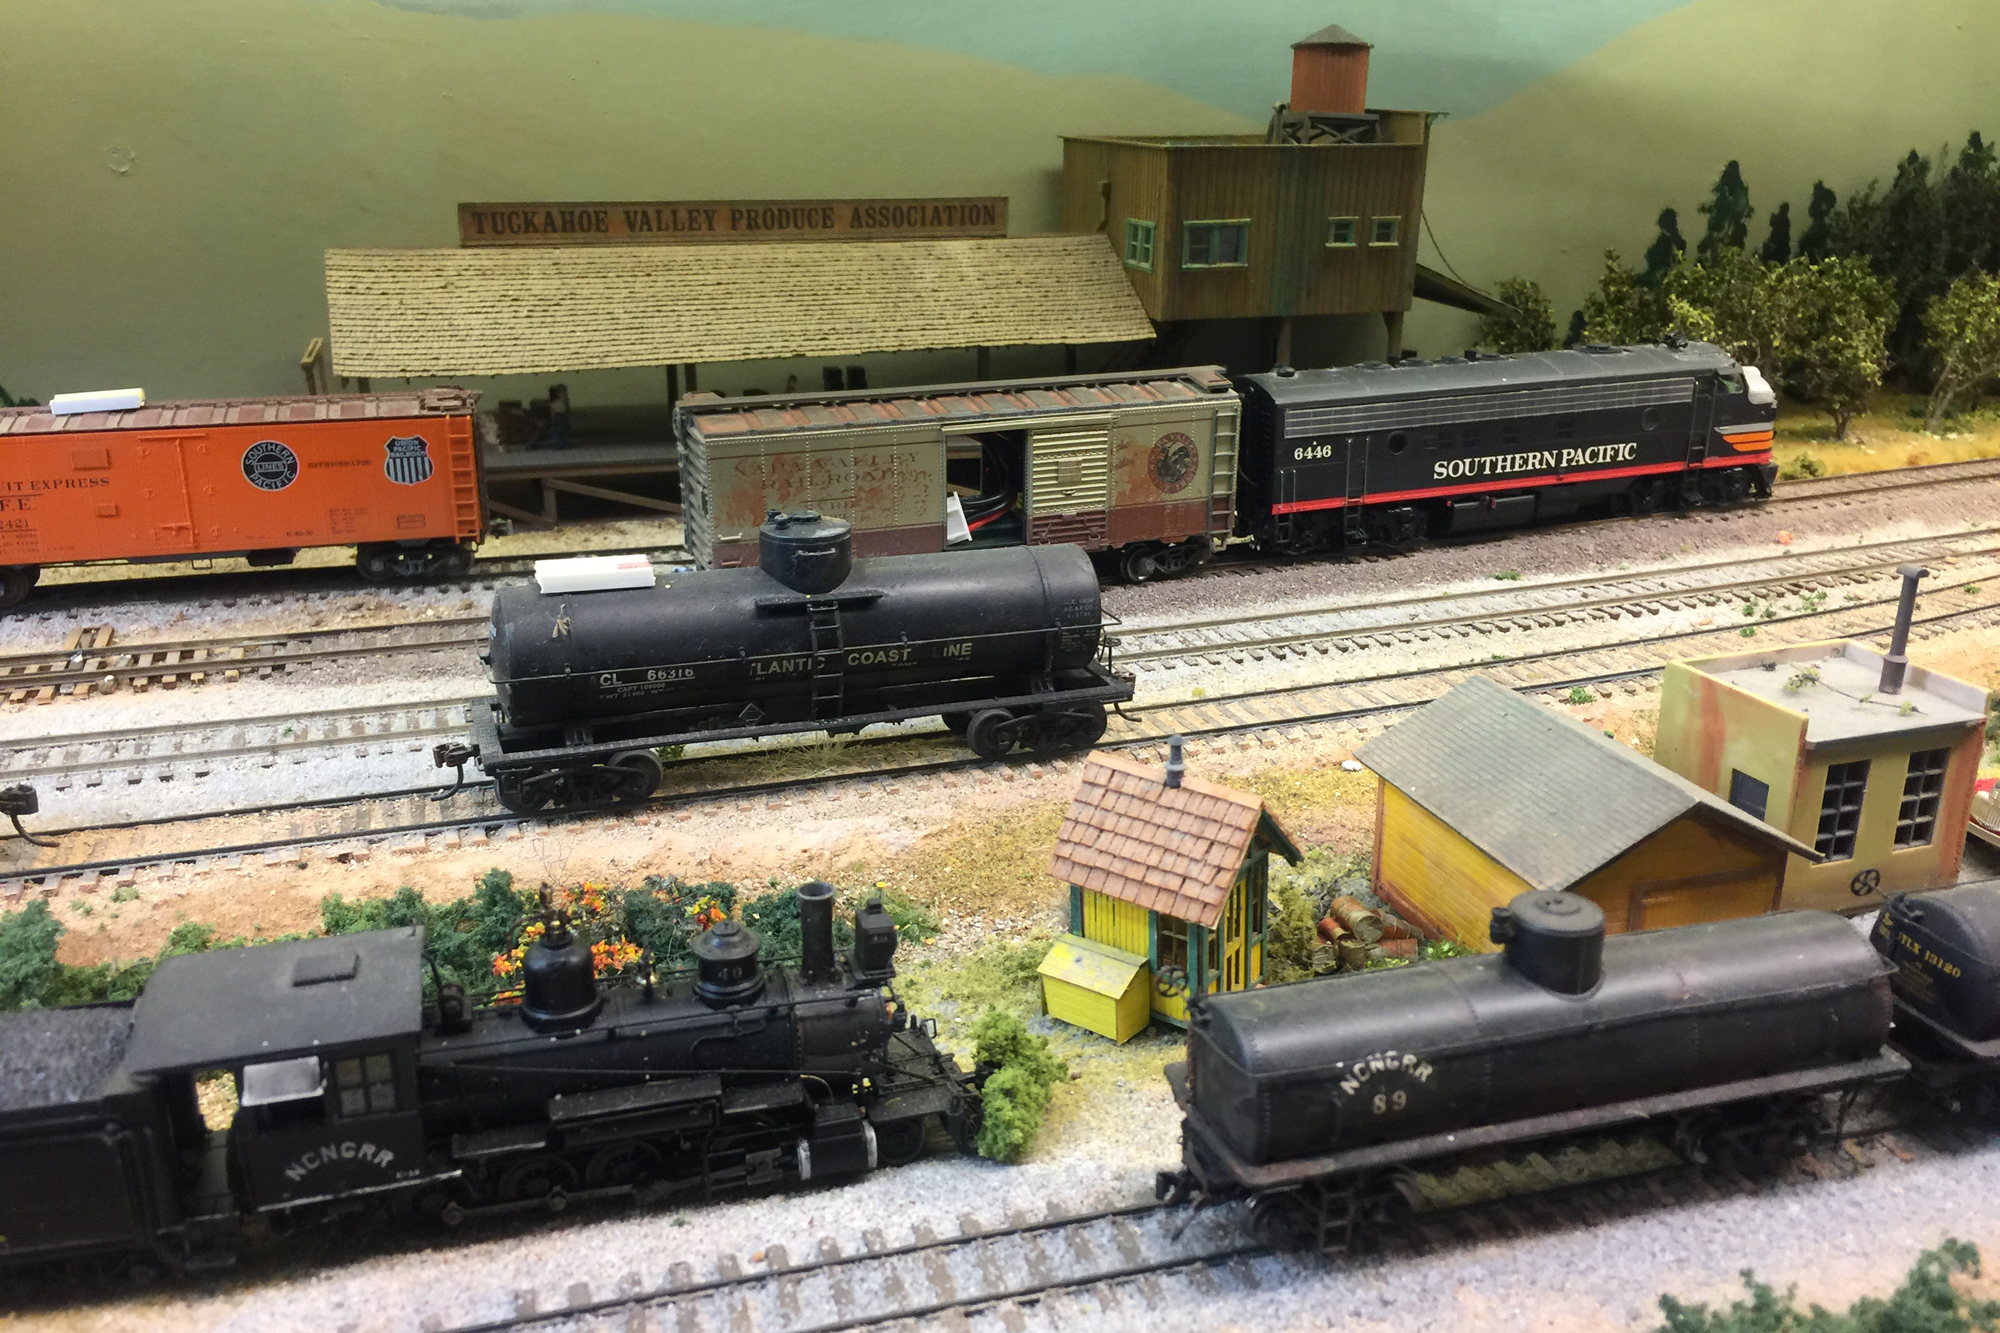 HO scale Dead Rail model layout by San Diego Division member.